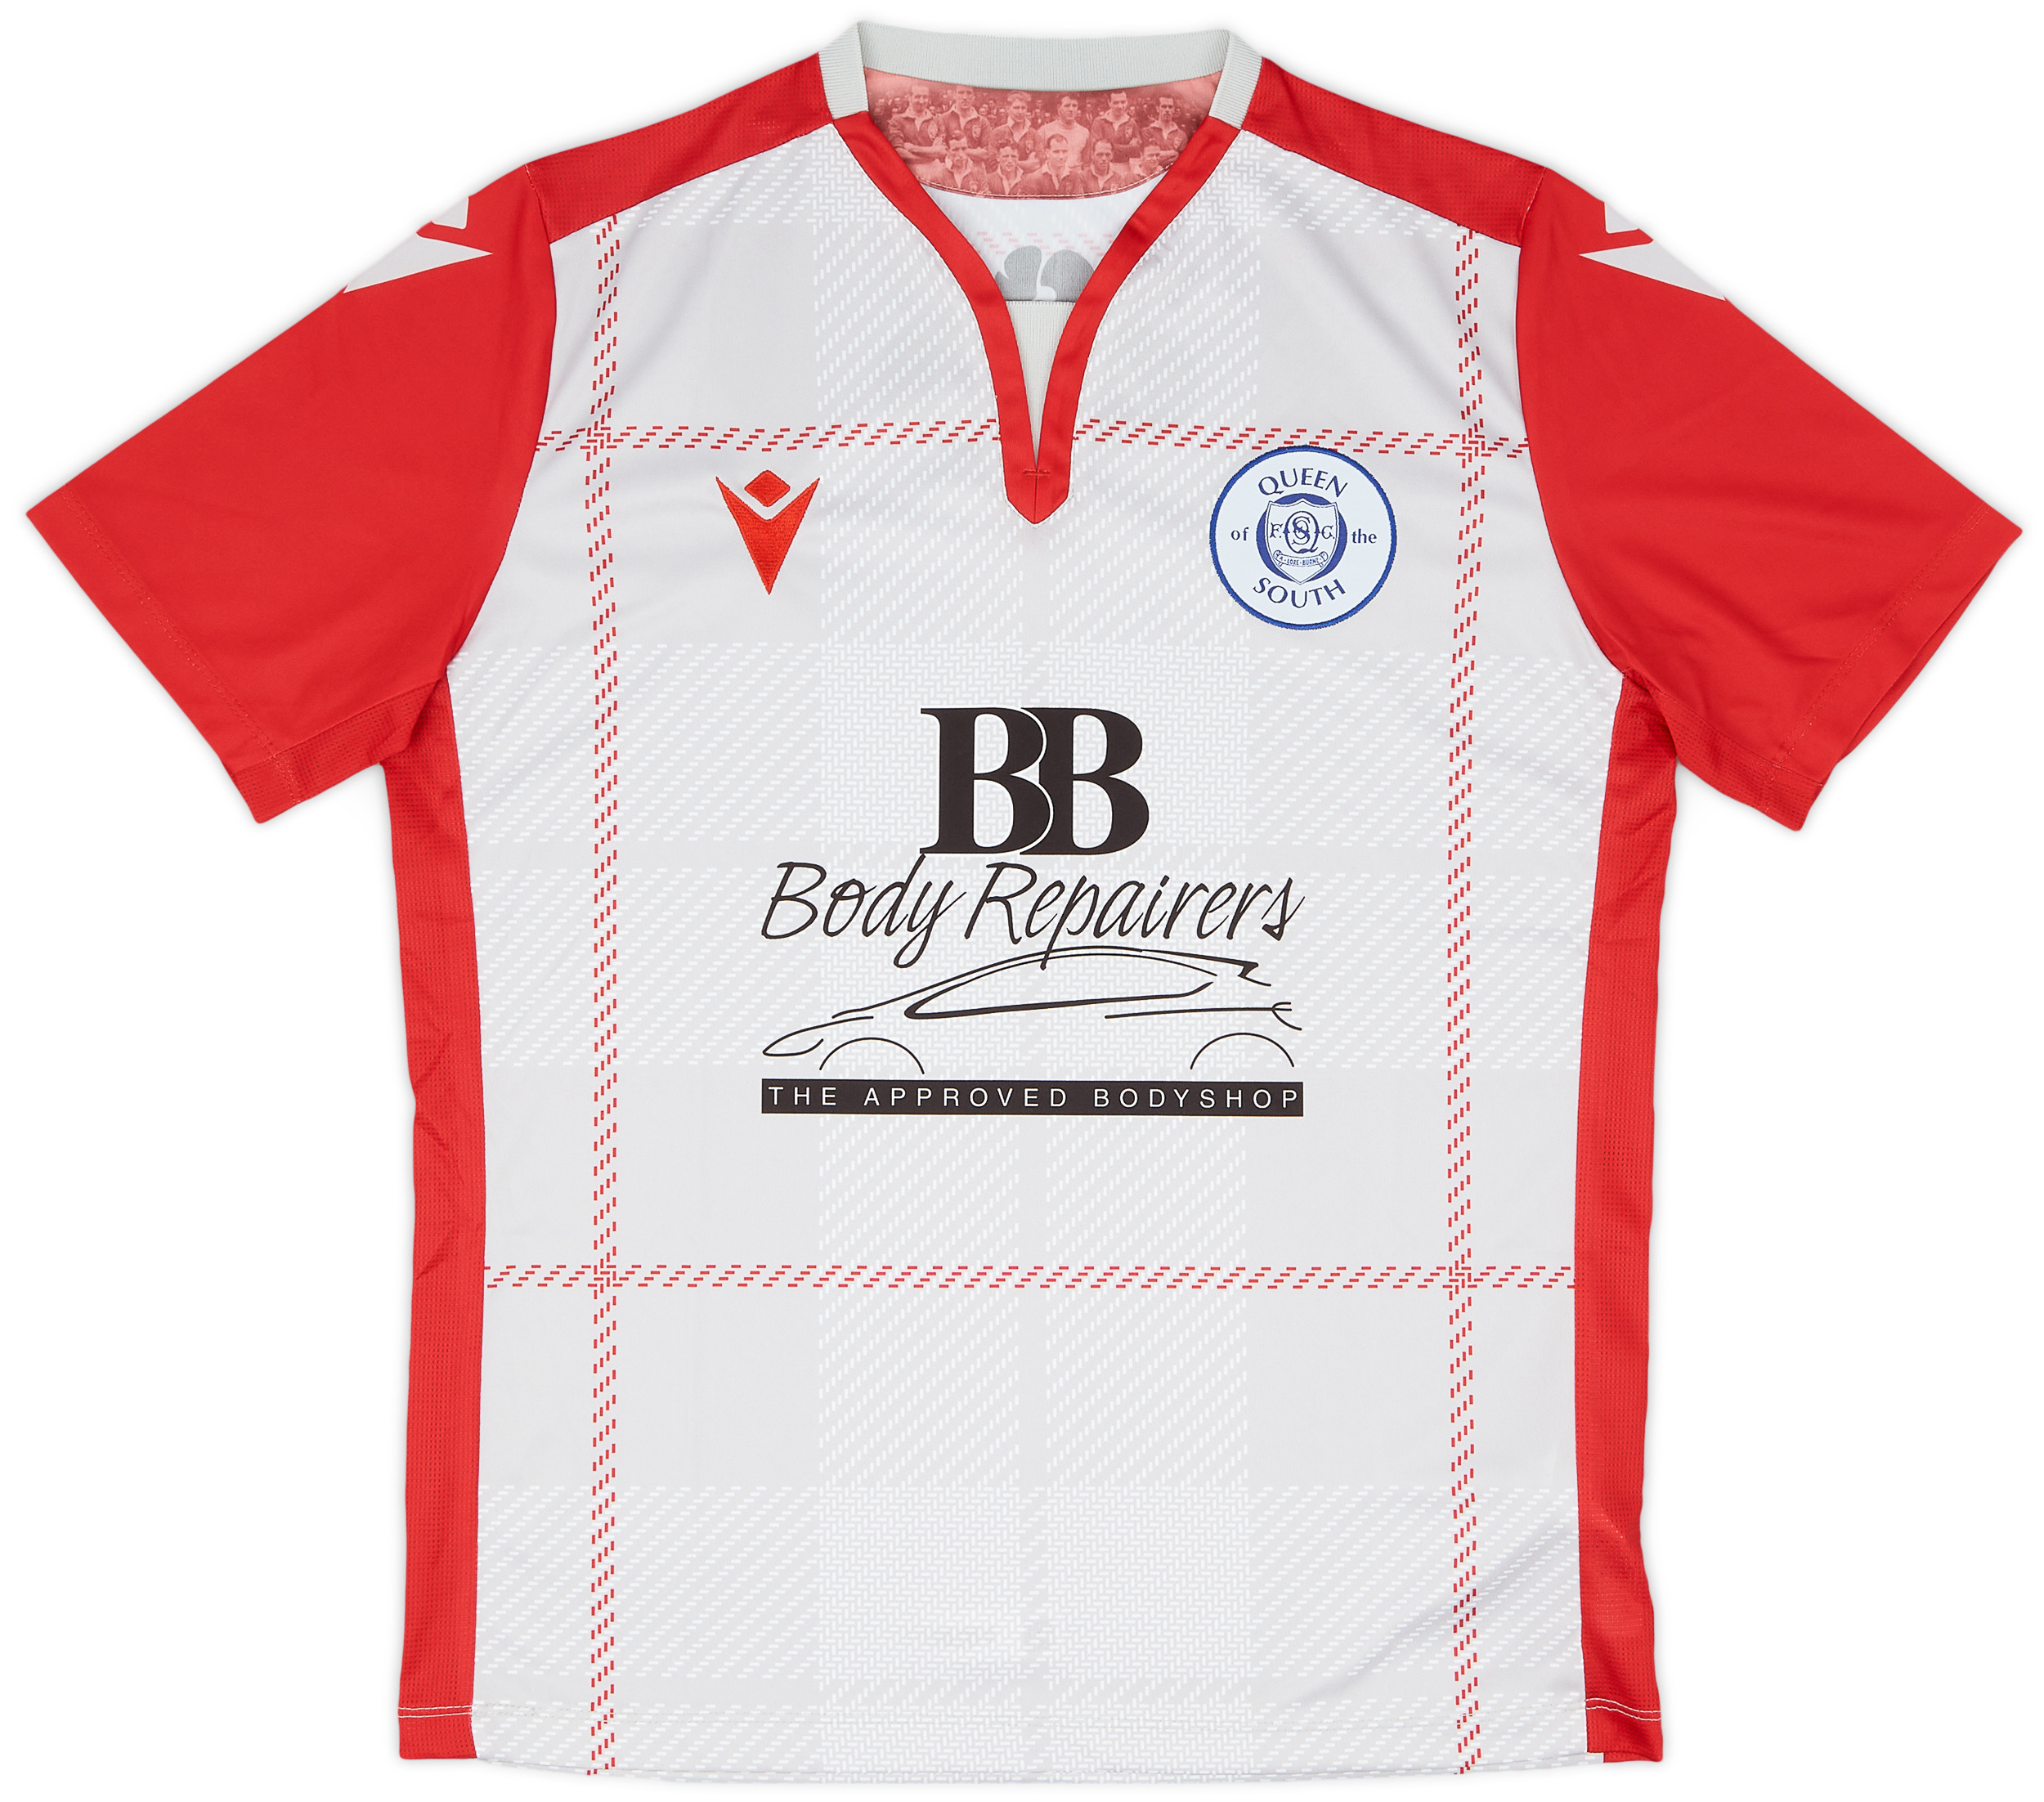 2019-20 Queen of the South Away Shirt - 10/10 - ()